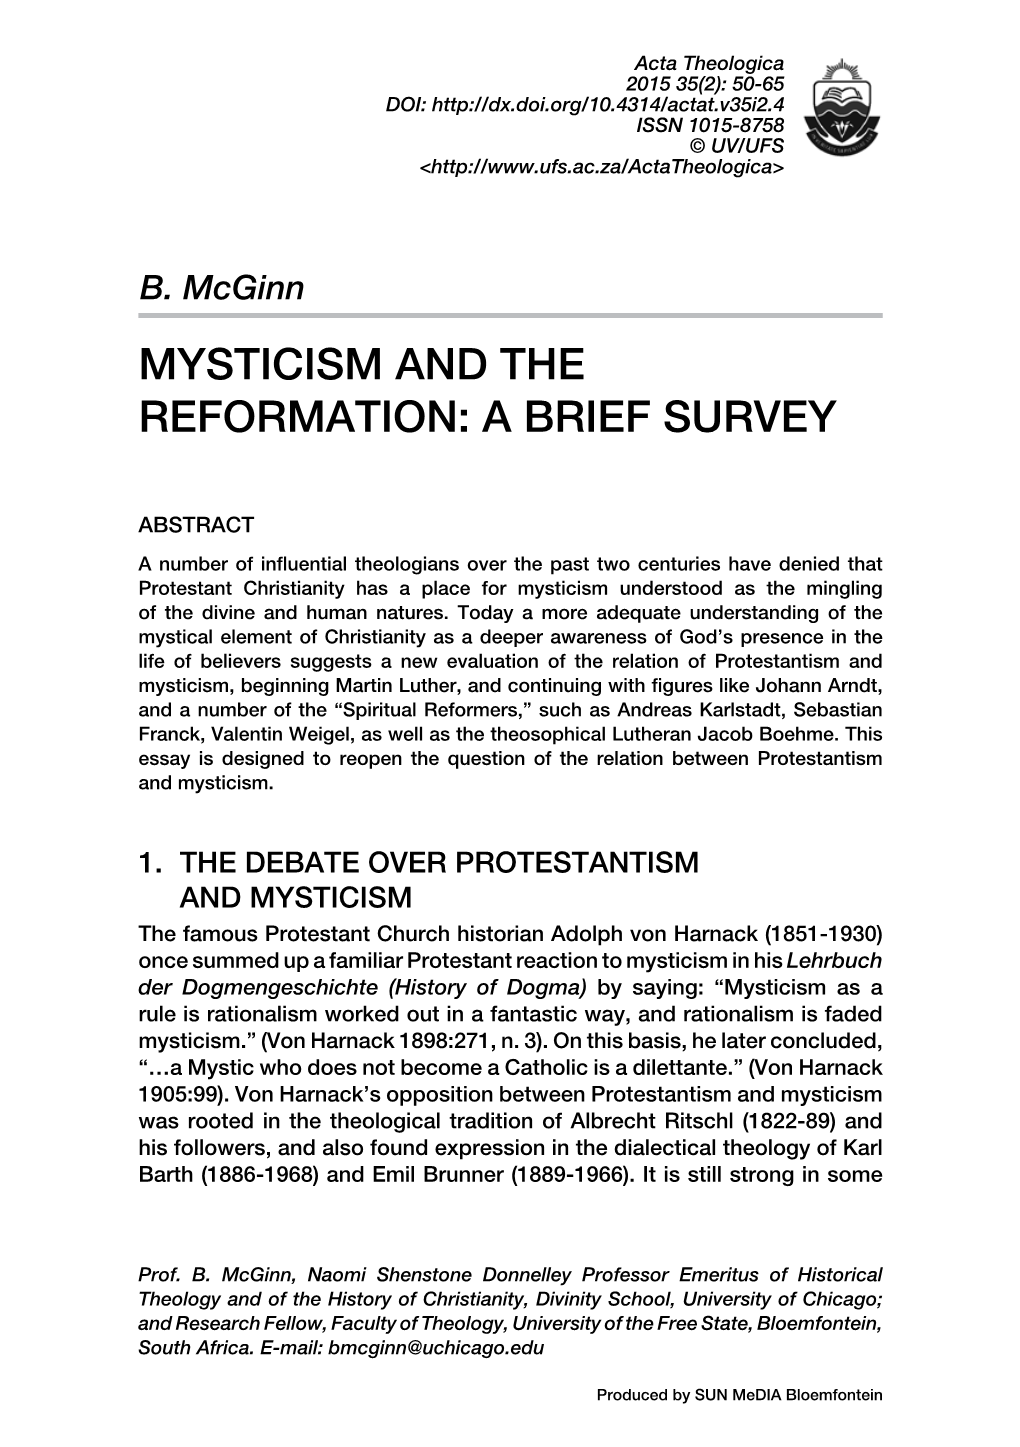 Mysticism and the Reformation: a Brief Survey